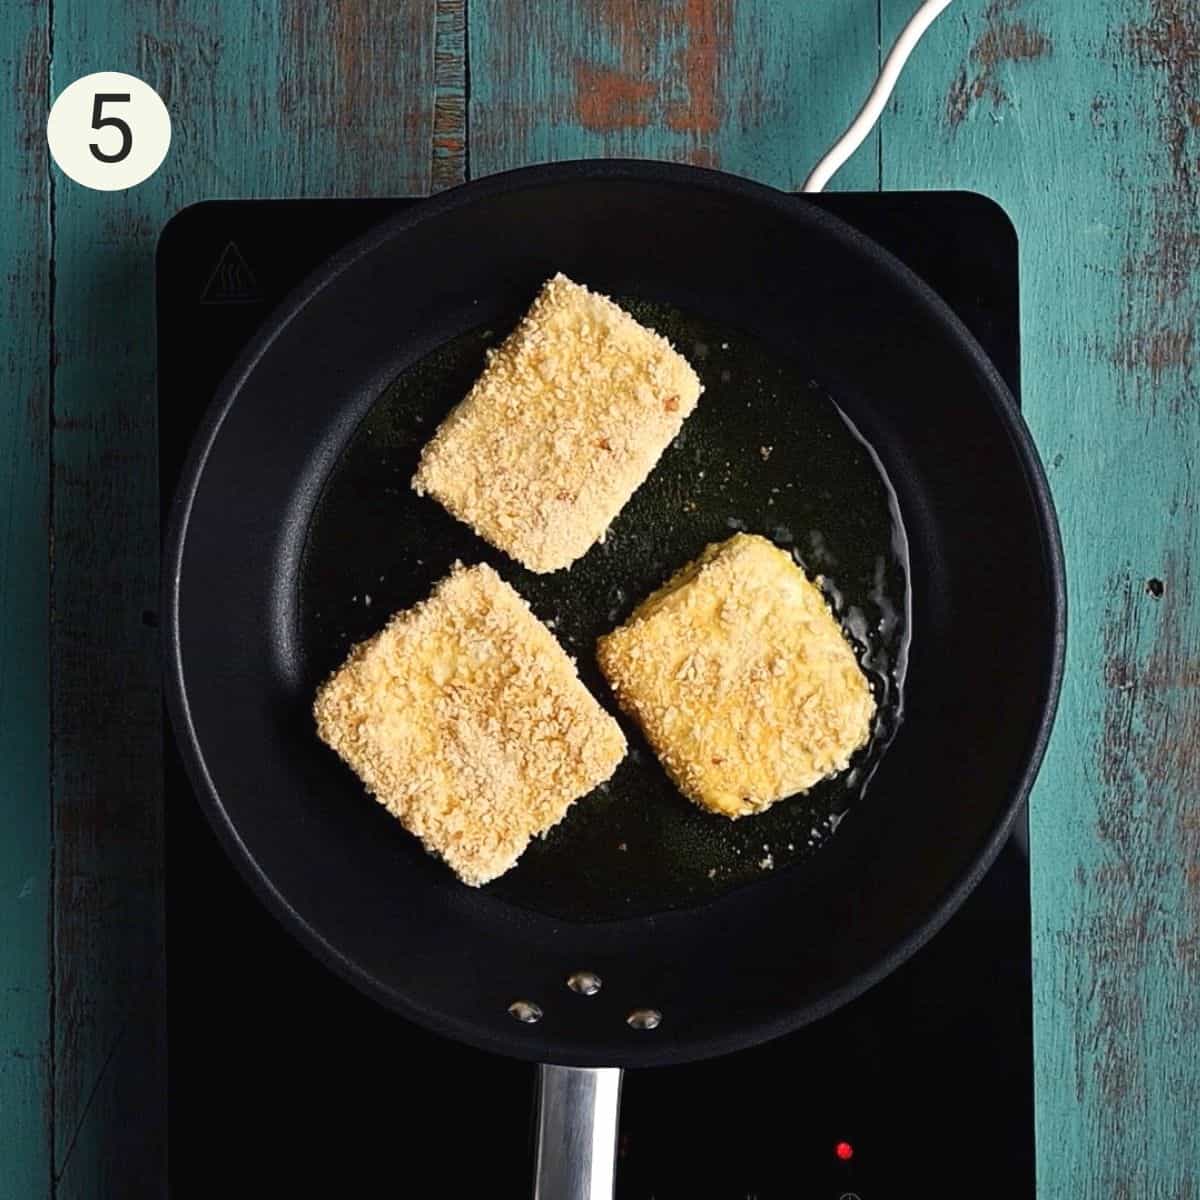 3 pieces of halloumi being fried in a pan with olive oil.